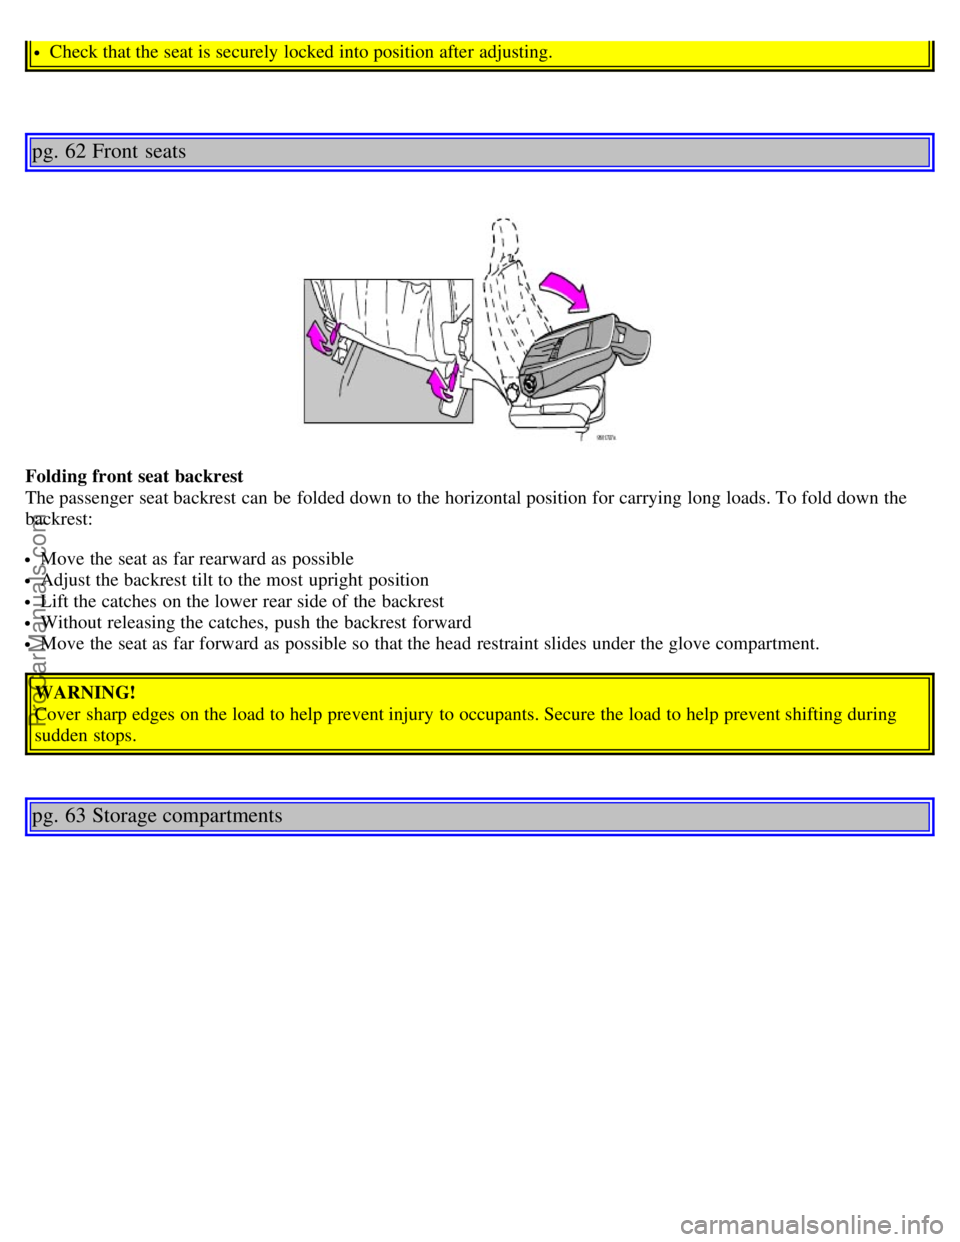 VOLVO V70 2005  Owners Manual Check that the seat is securely locked into position after adjusting.
pg. 62 Front  seats
Folding front seat backrest
The passenger  seat backrest can be  folded down to the horizontal position for ca